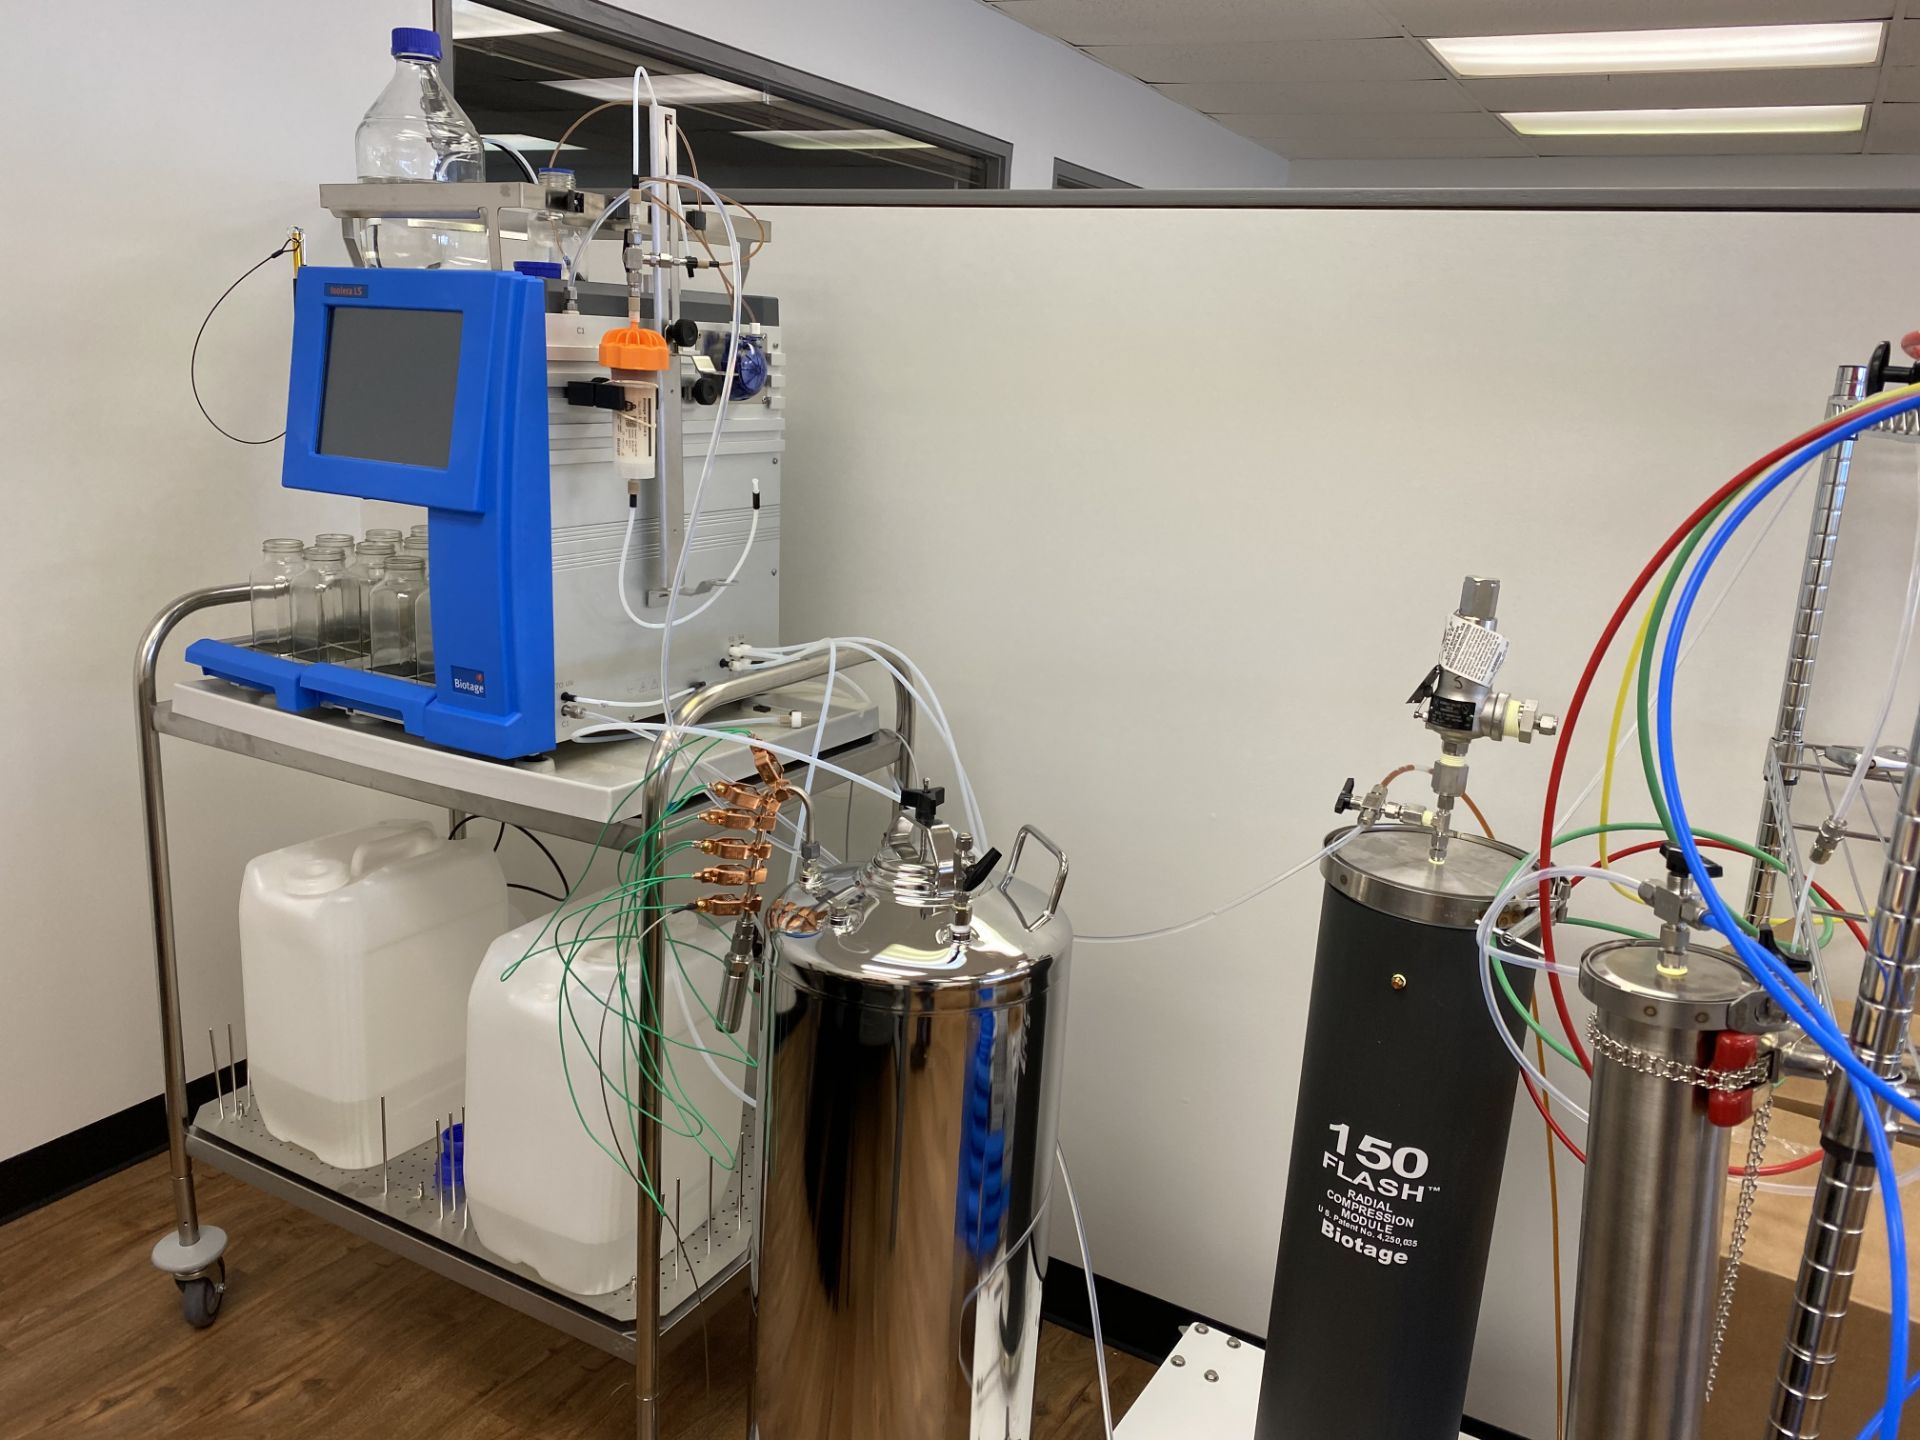 New/Unused Biotage Isolera Chromatography System w/ All Components